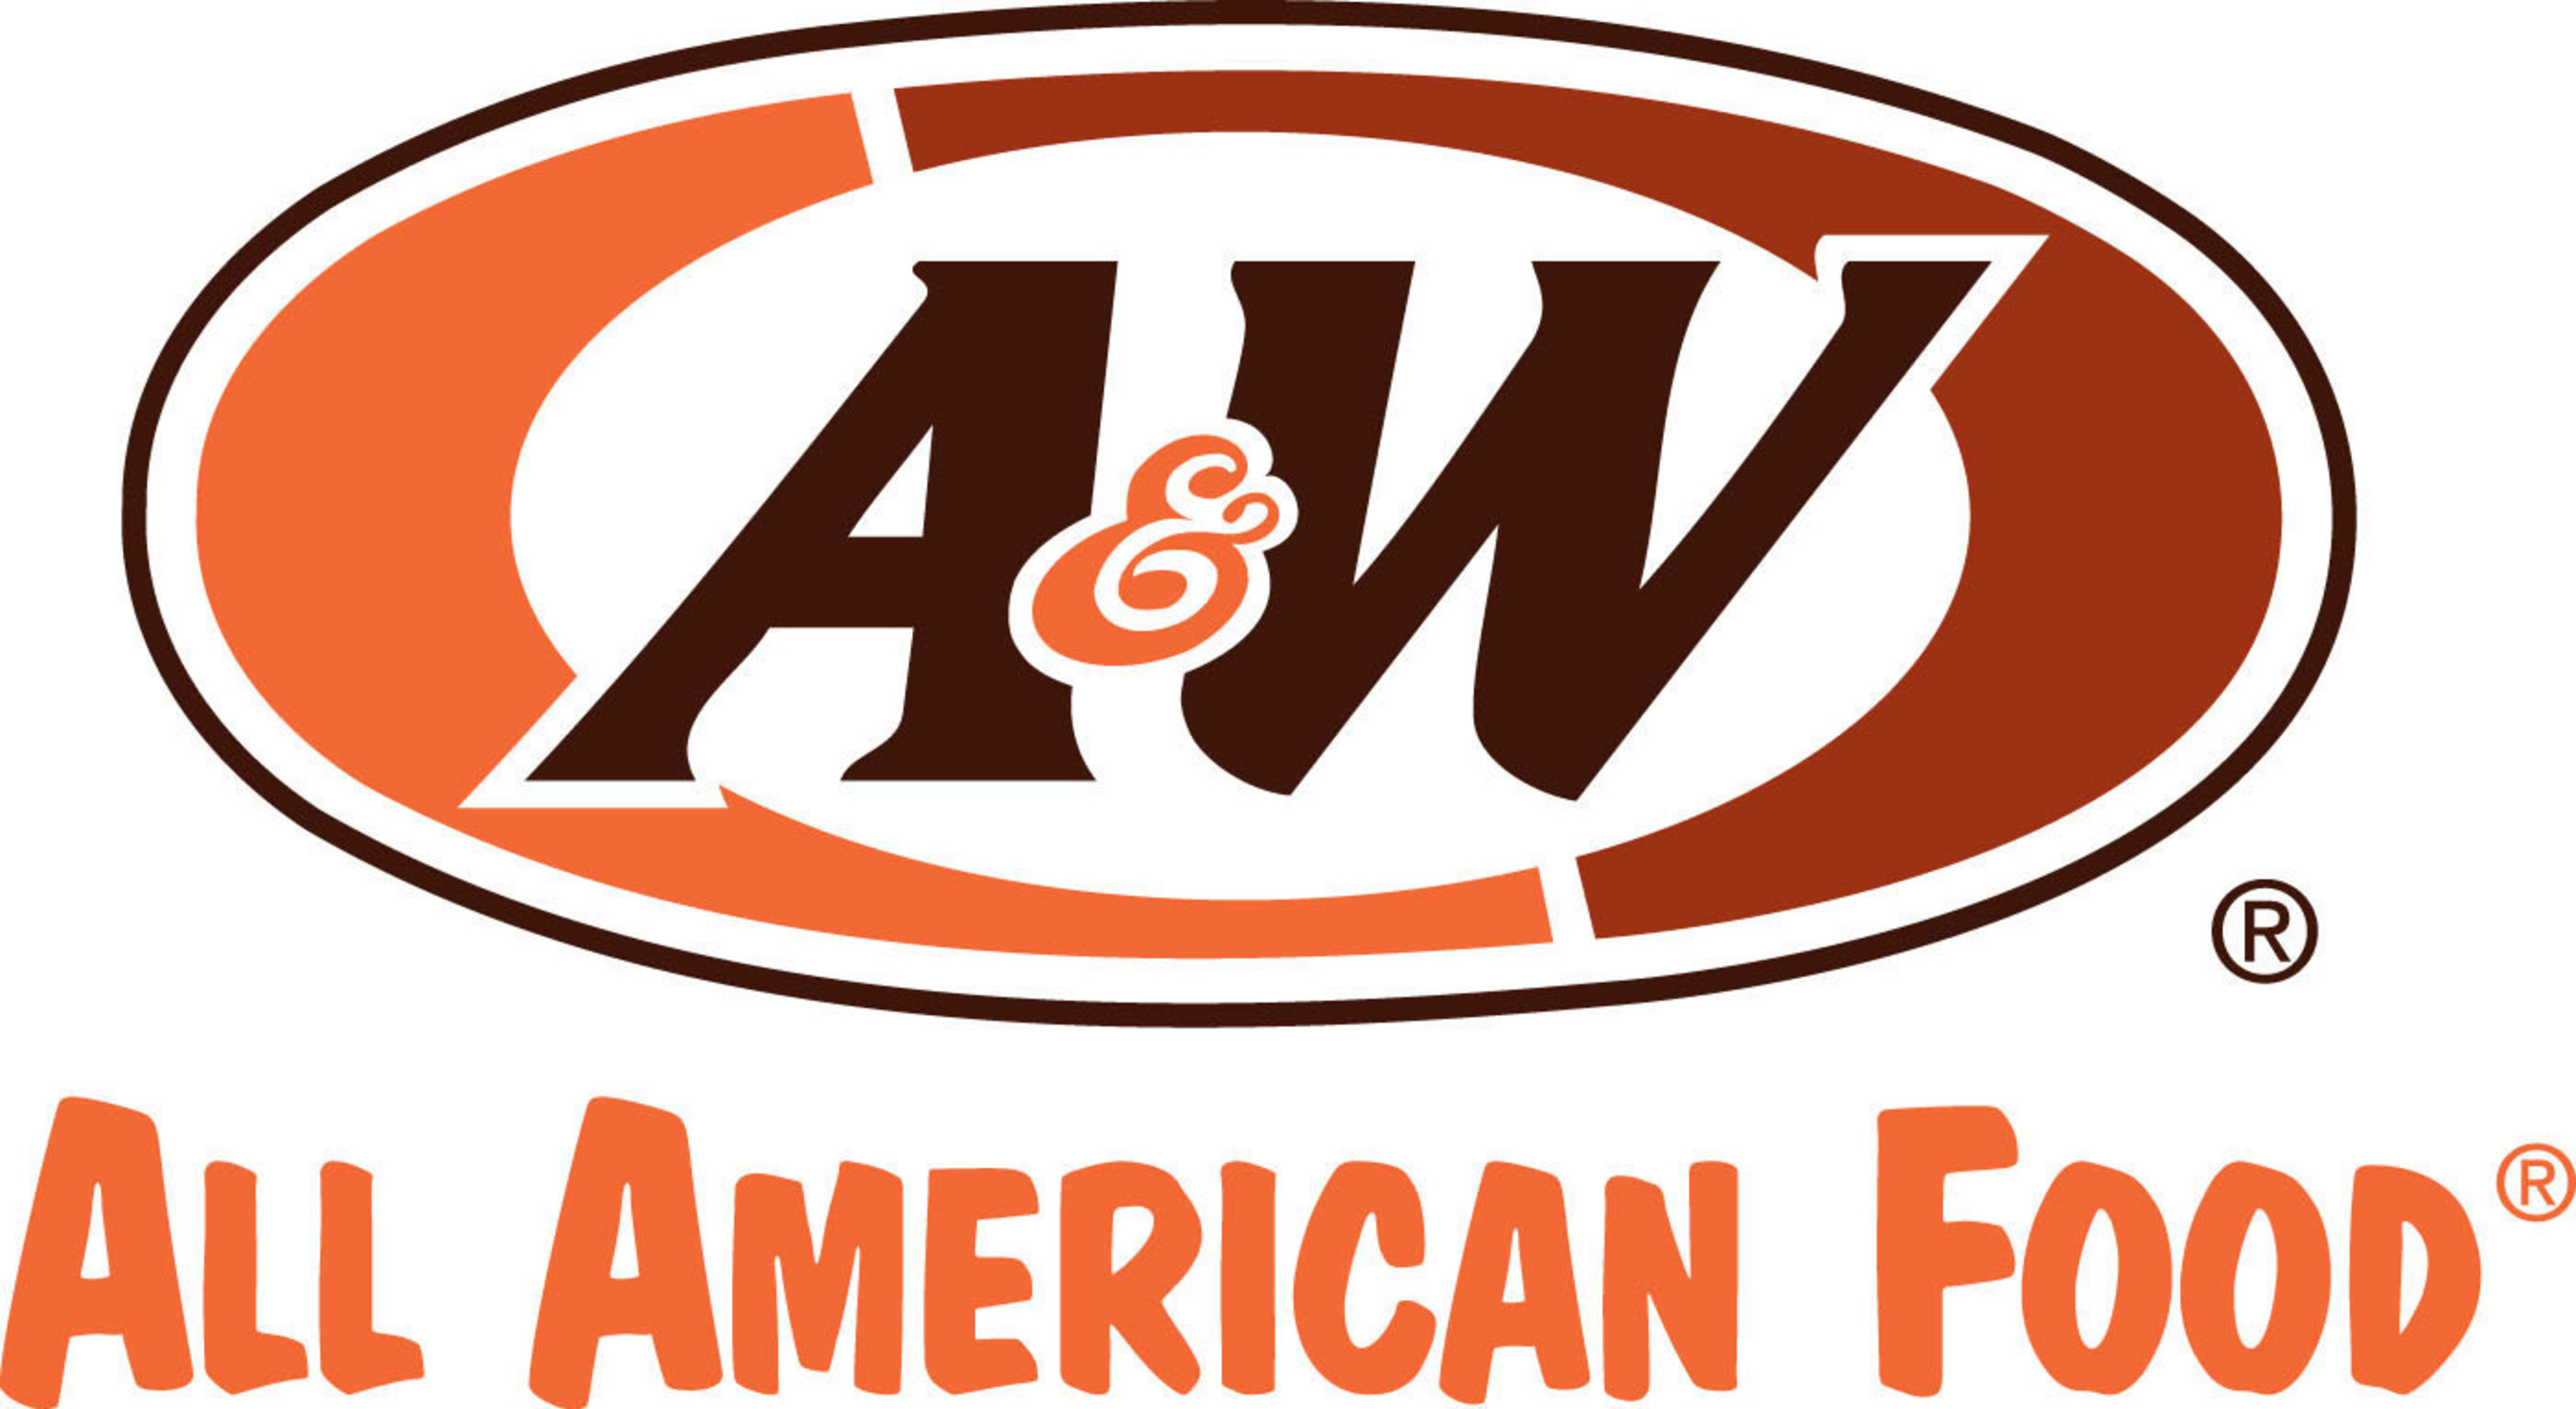 Founded in 1919, A&W Restaurants is the oldest franchise restaurant chain in the US.  A&W Root Beer is made today just like it was back then, fresh in the restaurants.  Ingredients include real cane sugar, water; and a proprietary blend of herbs, bark, spices, and berries.  It's still caffeine free and served up in a frosty mug. A&W is owned by a partnership of franchisees; the company has 1,100 franchise locations in 10 countries and territories.